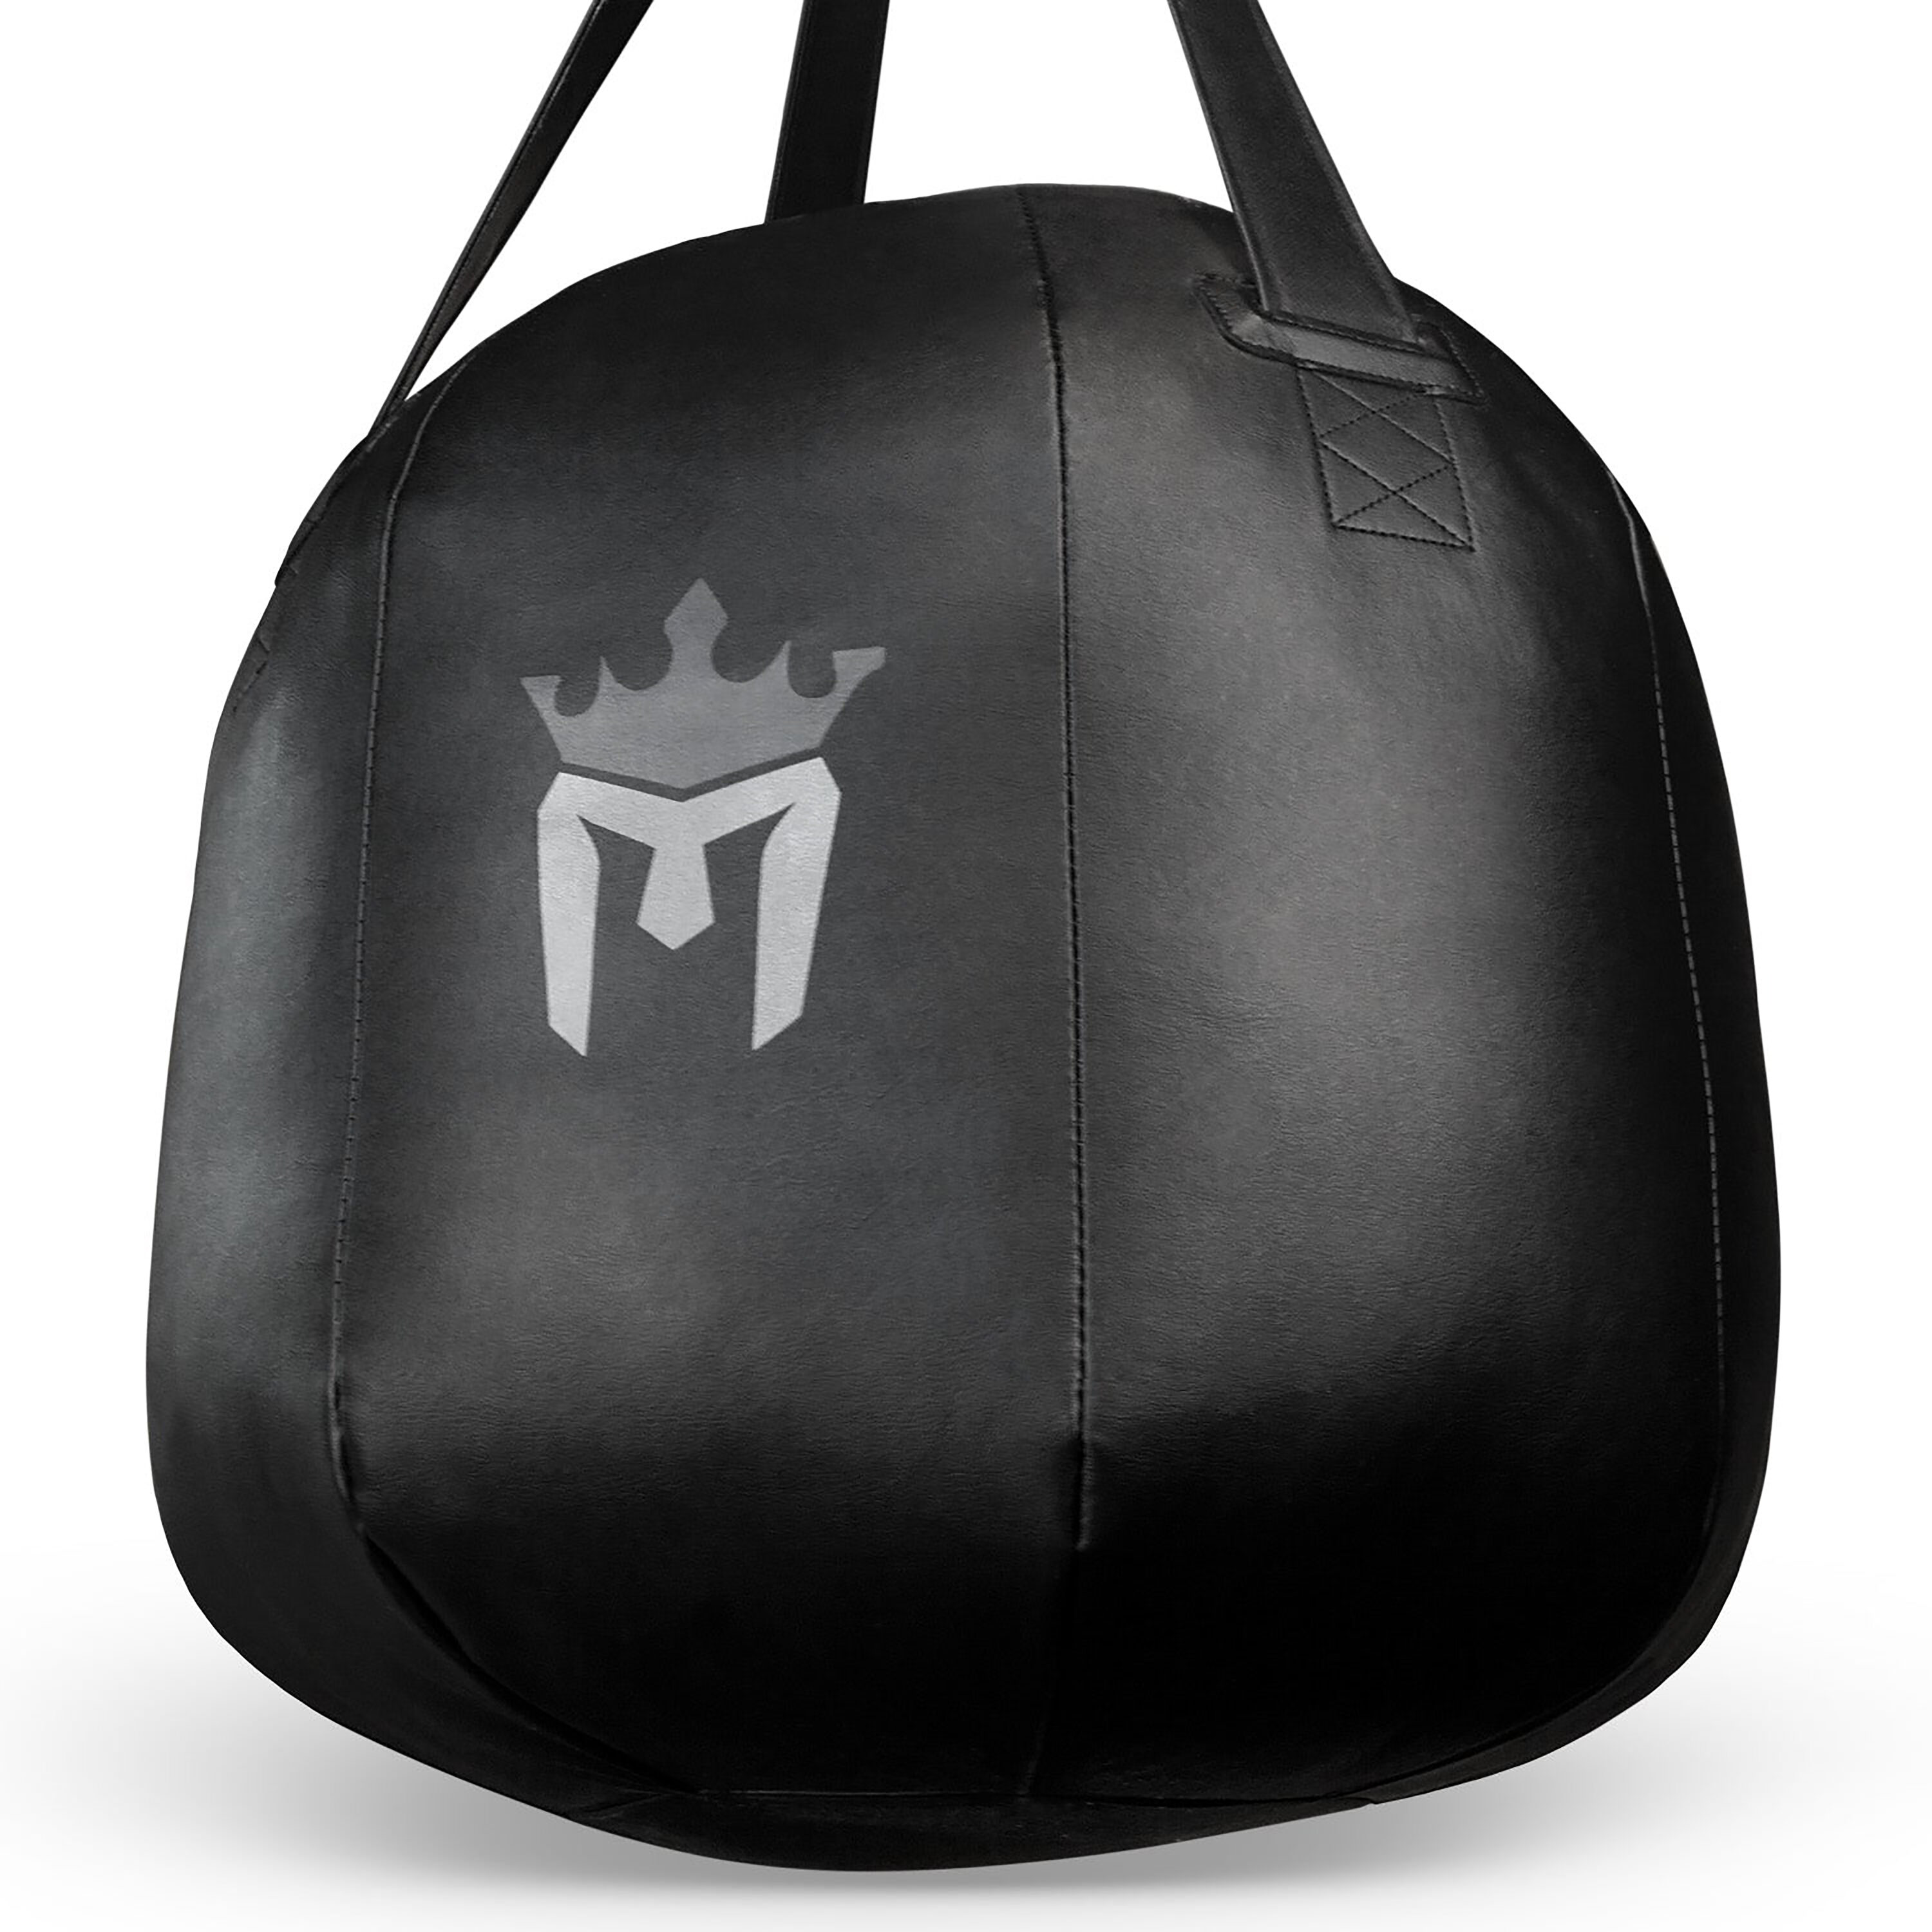 Meister 100lb Filled Heavy Bag for Boxing, MMA & Muay Thai - 60 Professional Kicking & Punching Bag - Black